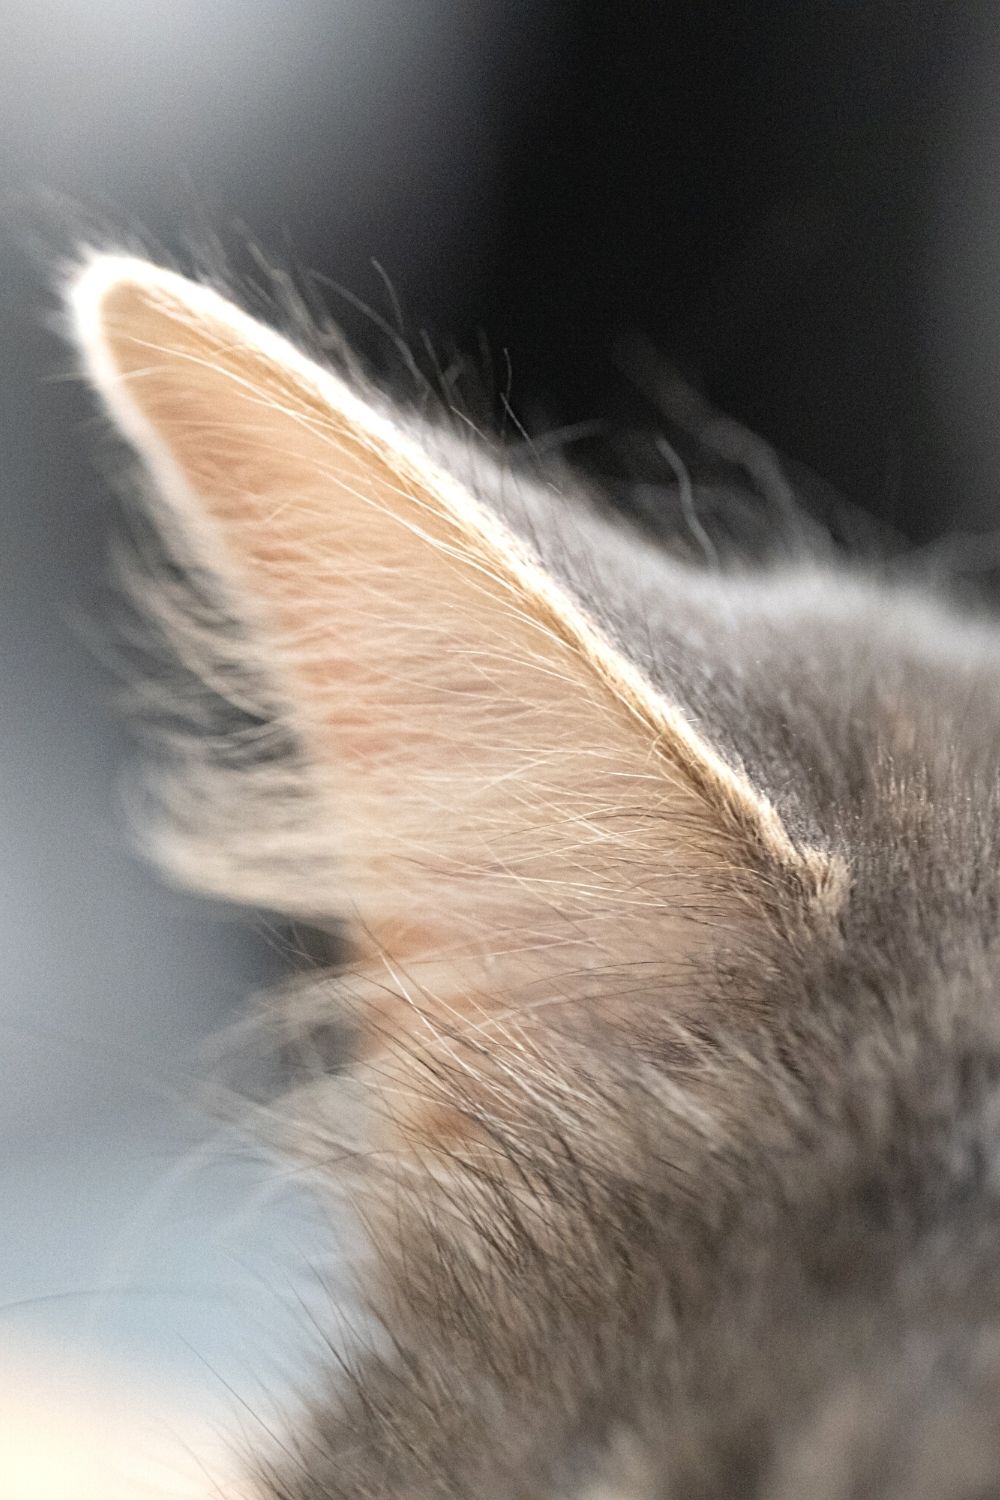 Cats like earwax because of its protein content